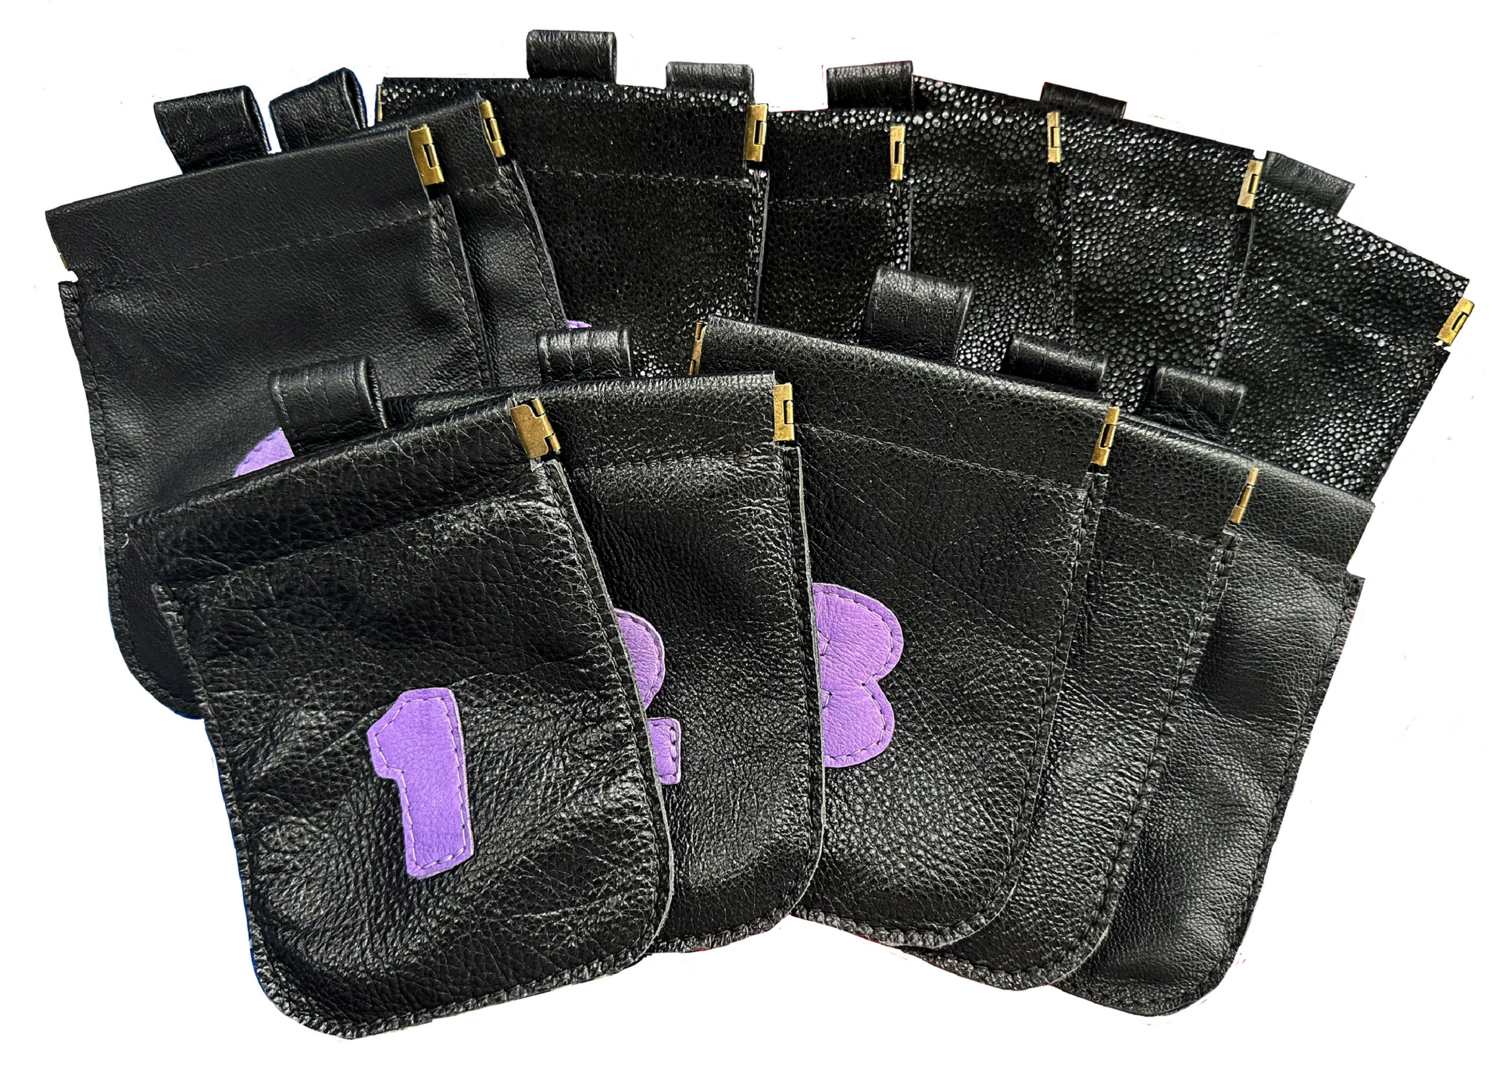 Custom Spring Frame Numbered Ammo Pouches - Set of 12